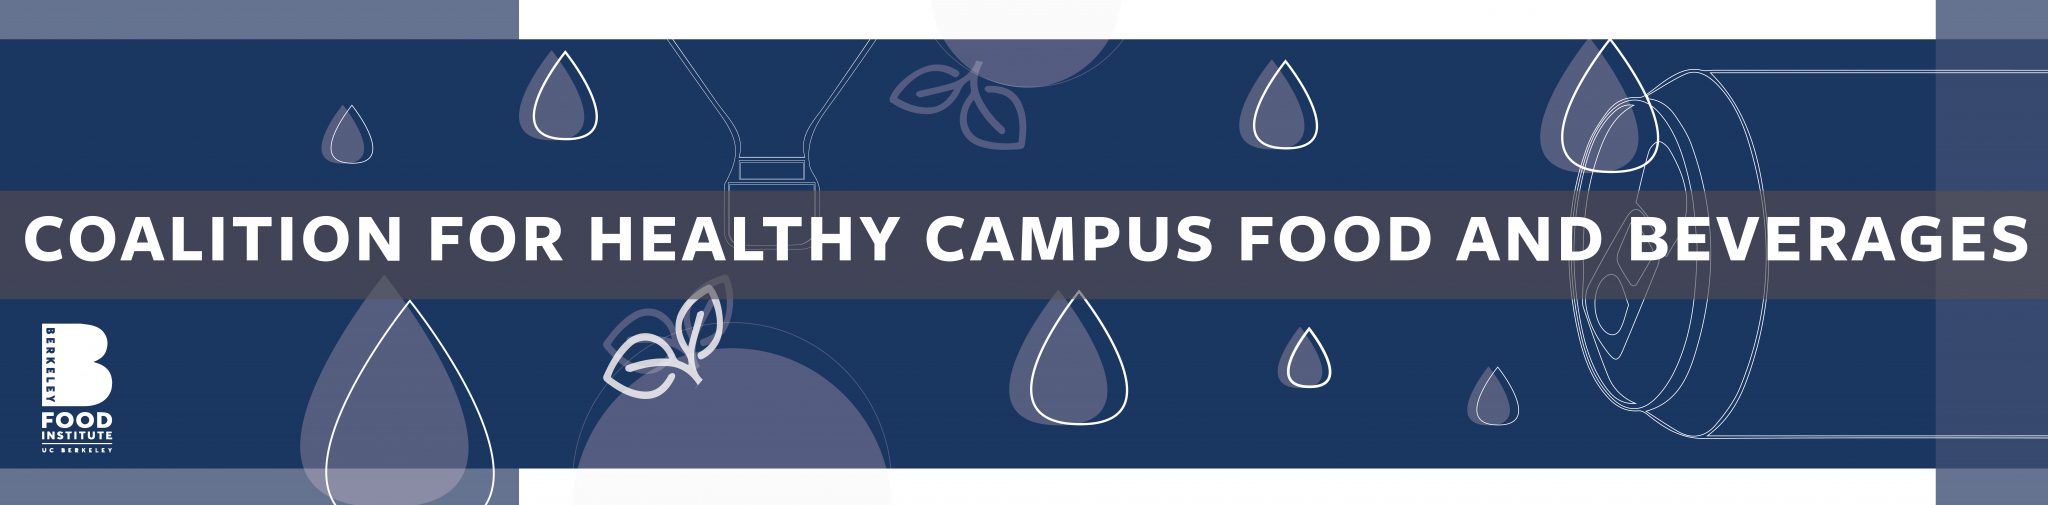 Coalition for Healthy Campus Food and Beverages banner